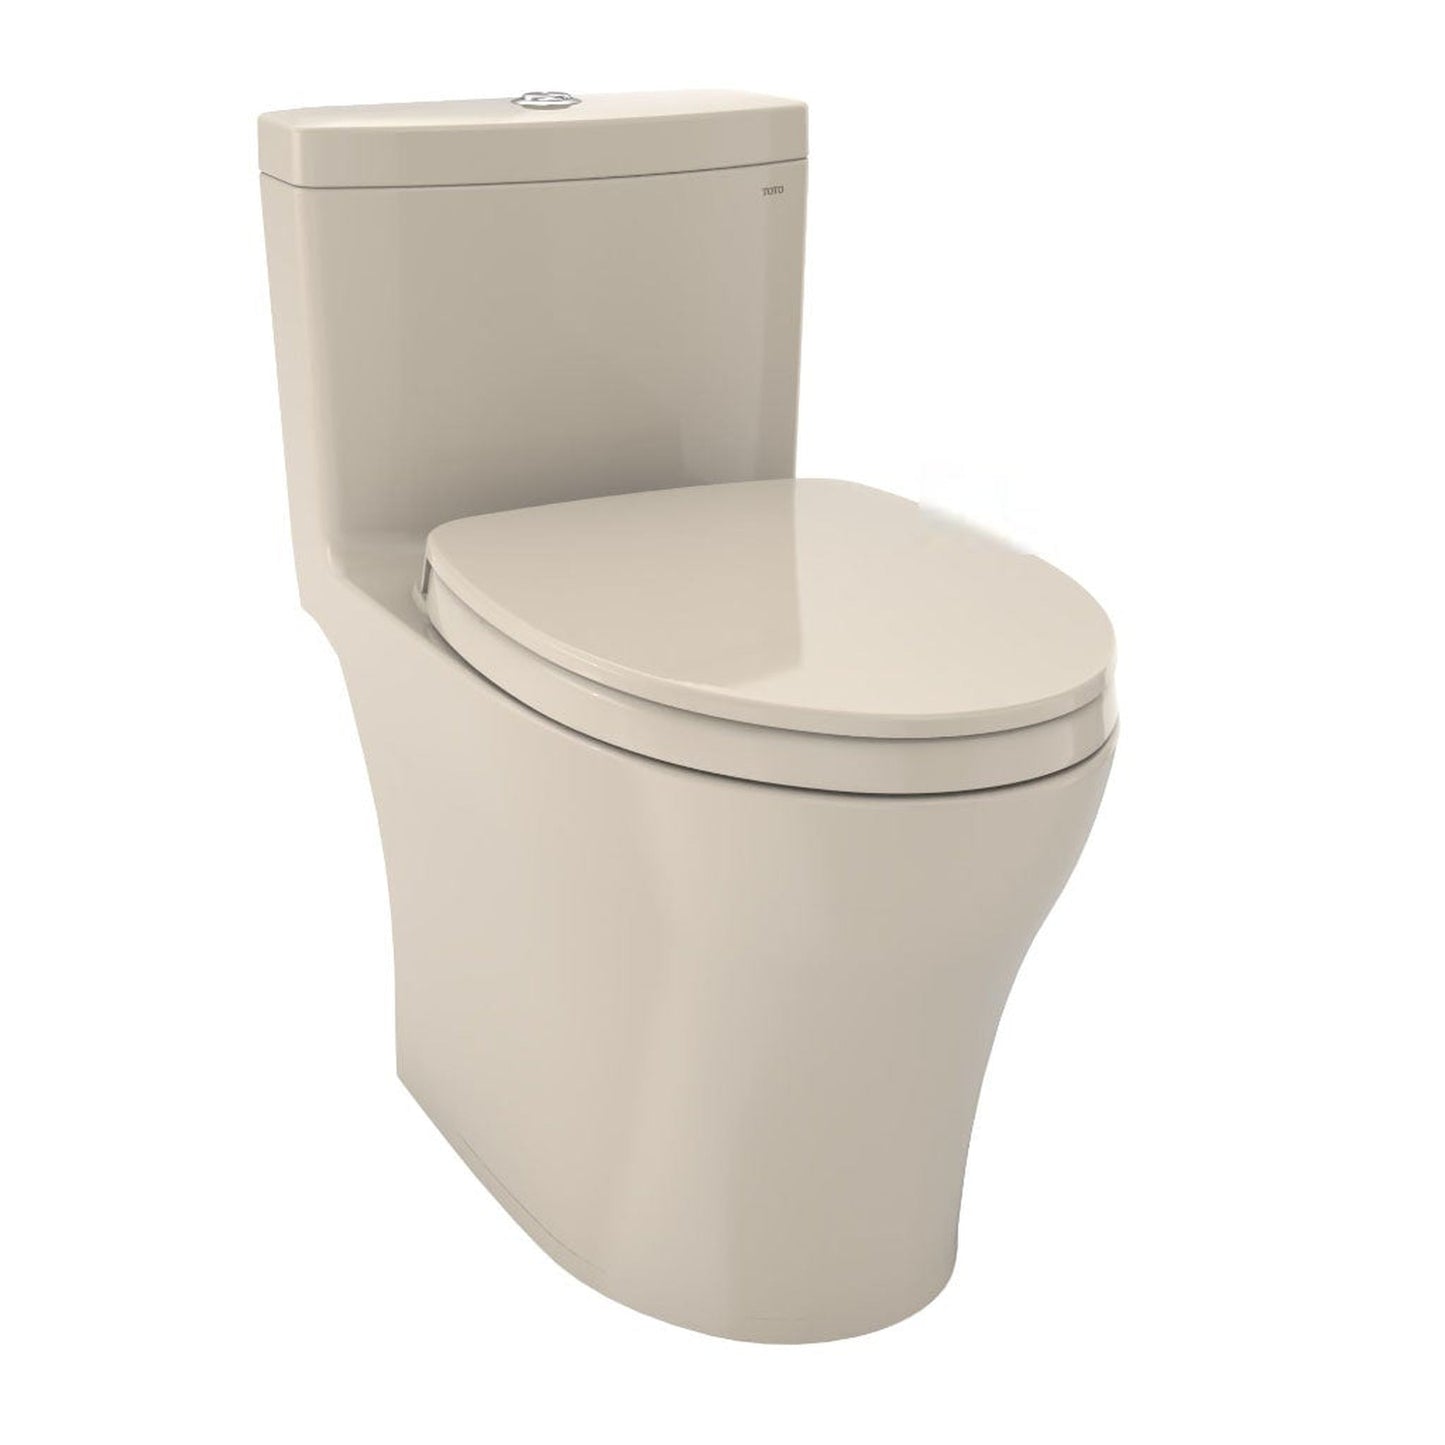 TOTO Aquia IV Bone One-Piece 0.8 GPF & 1.0 GPF Dual-Flush Elongated Toilet With WASHLET+ Connection - Seat Included